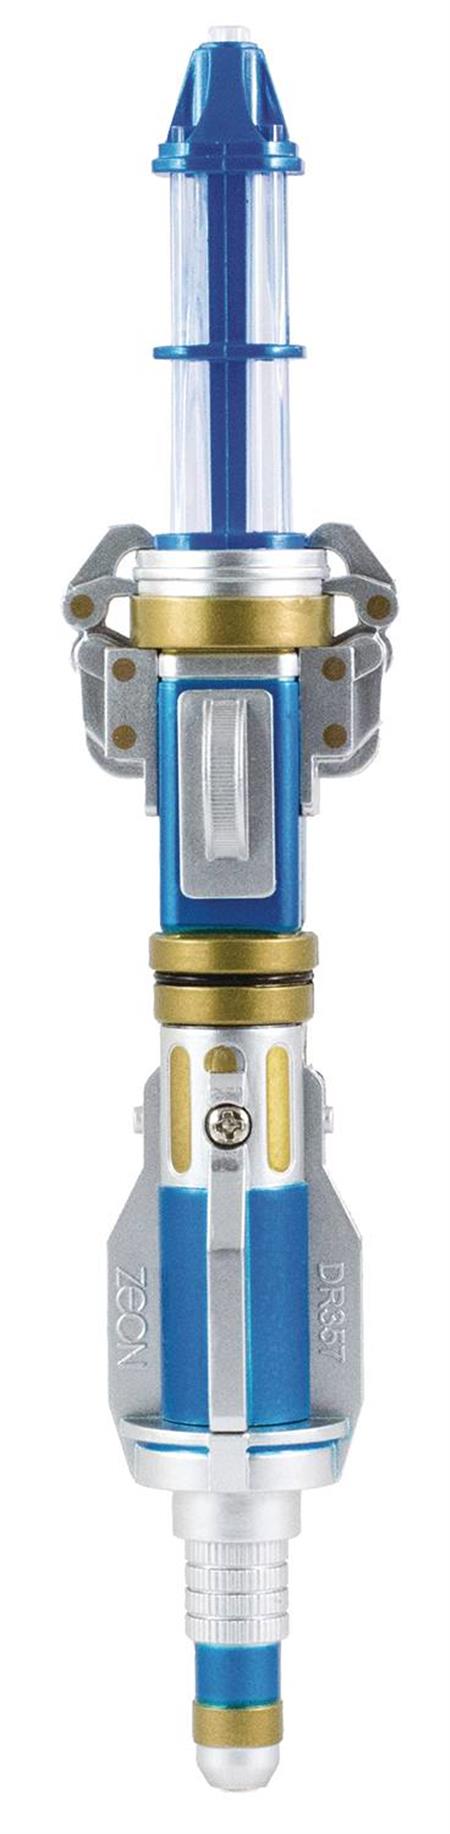 DOCTOR WHO 12TH DOCTOR SONIC SCREWDRIVER FLASHLIGHT